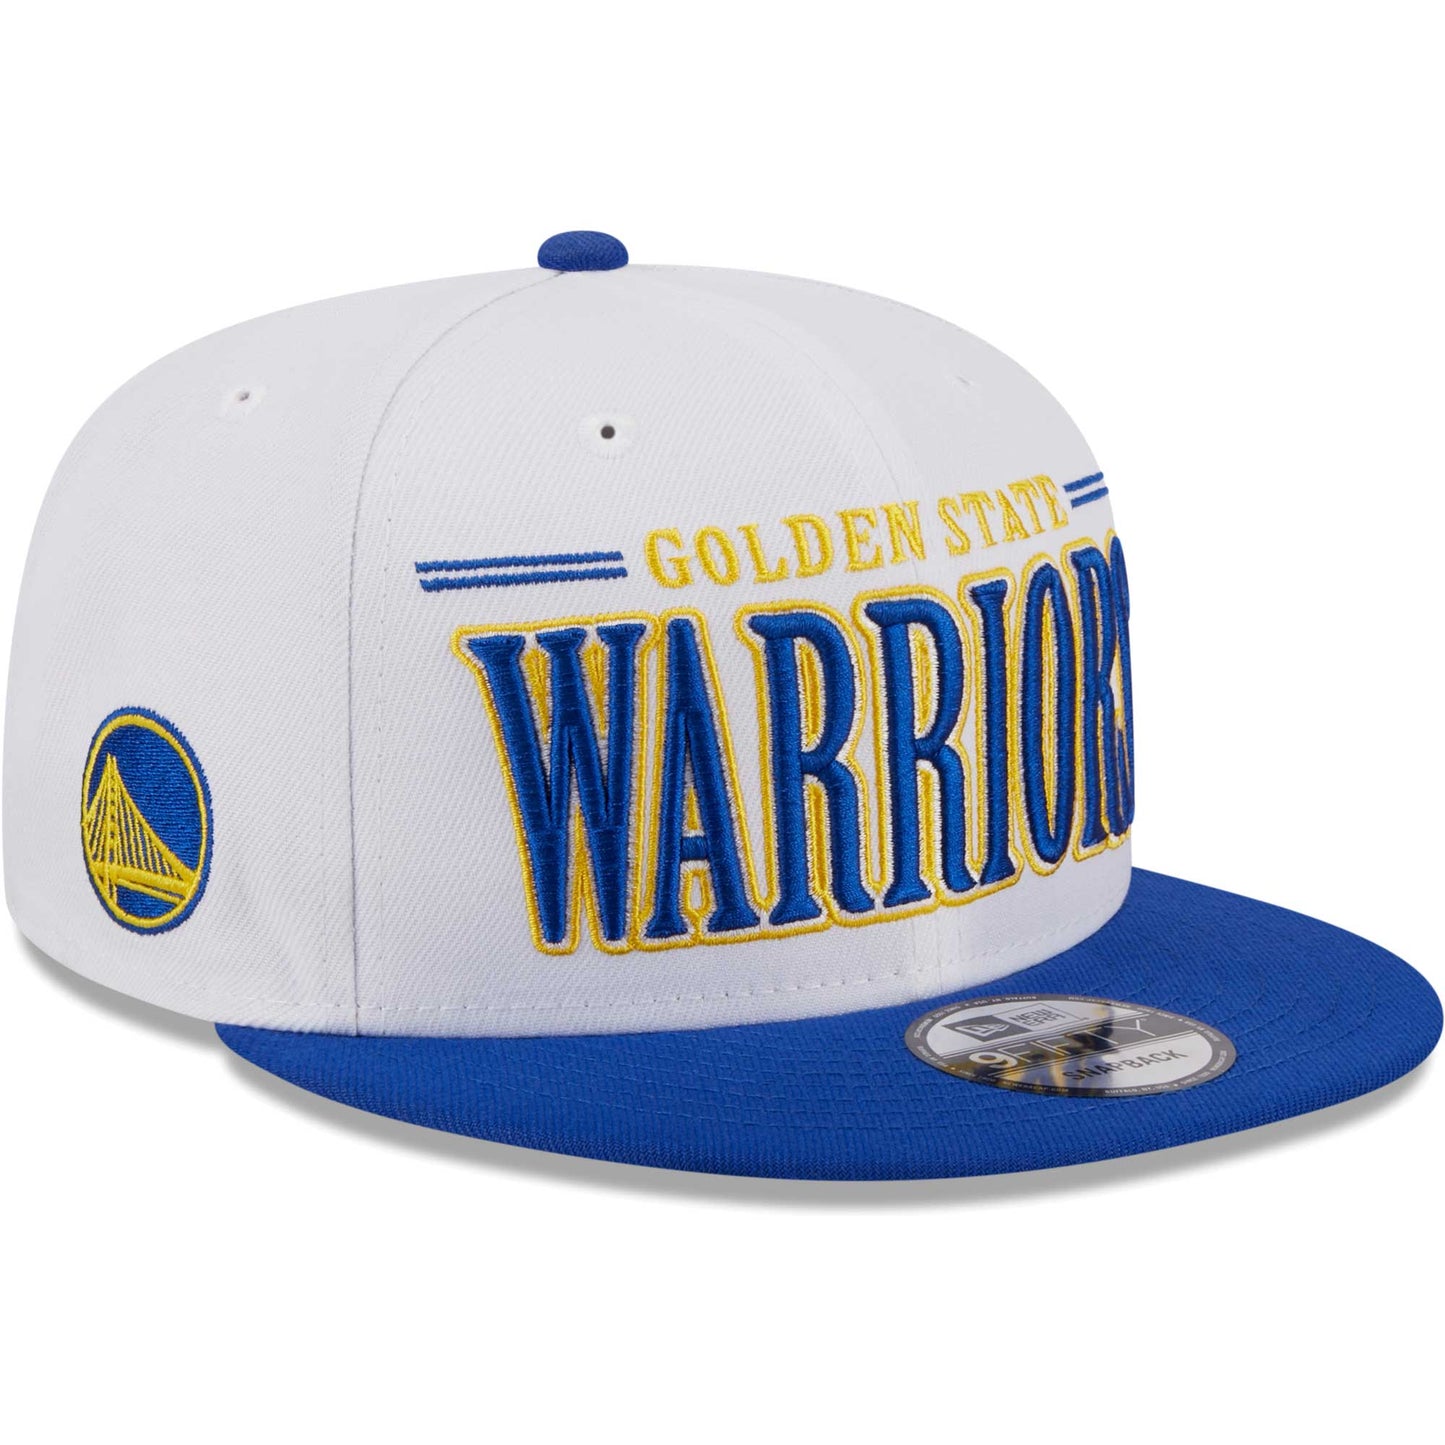 Golden State Warriors New Era Team Stack 9FIFTY Snapback Hat - White